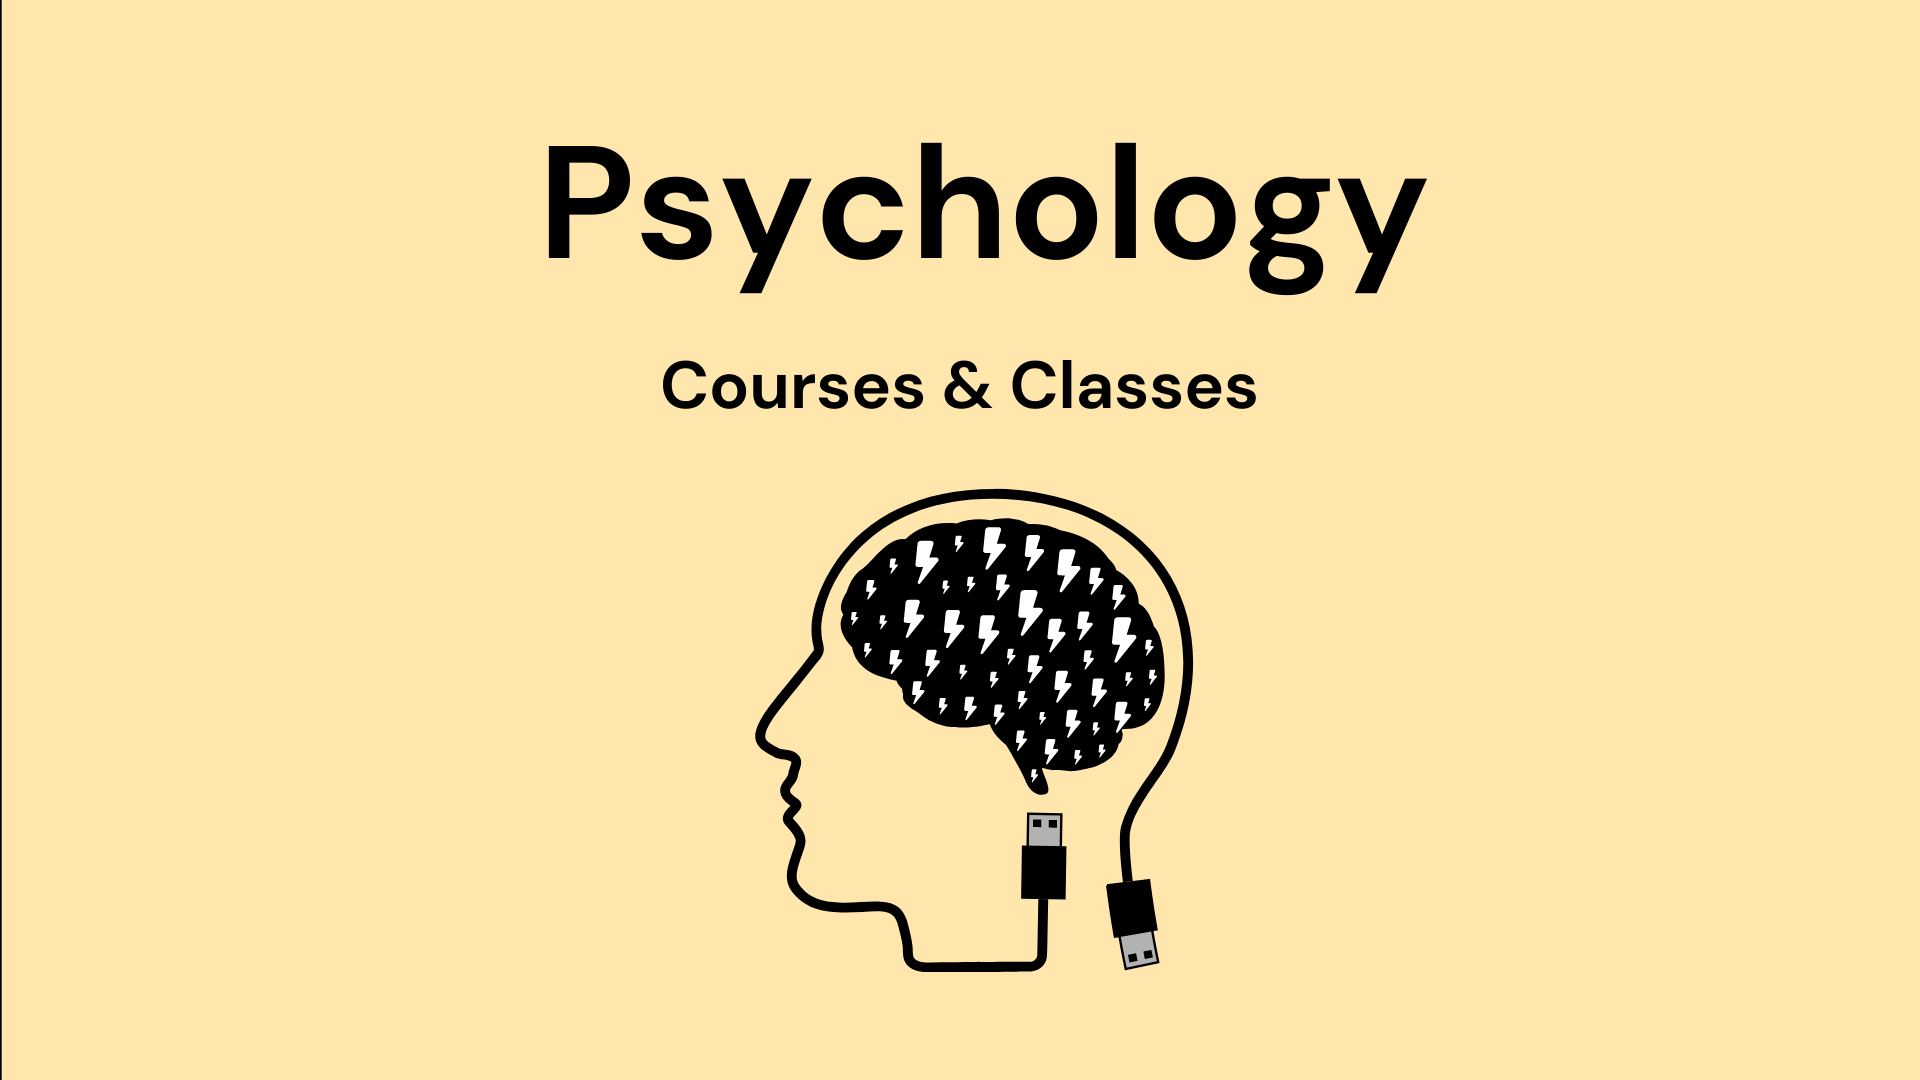 Online Psychology Courses - What You Should Need To Know?